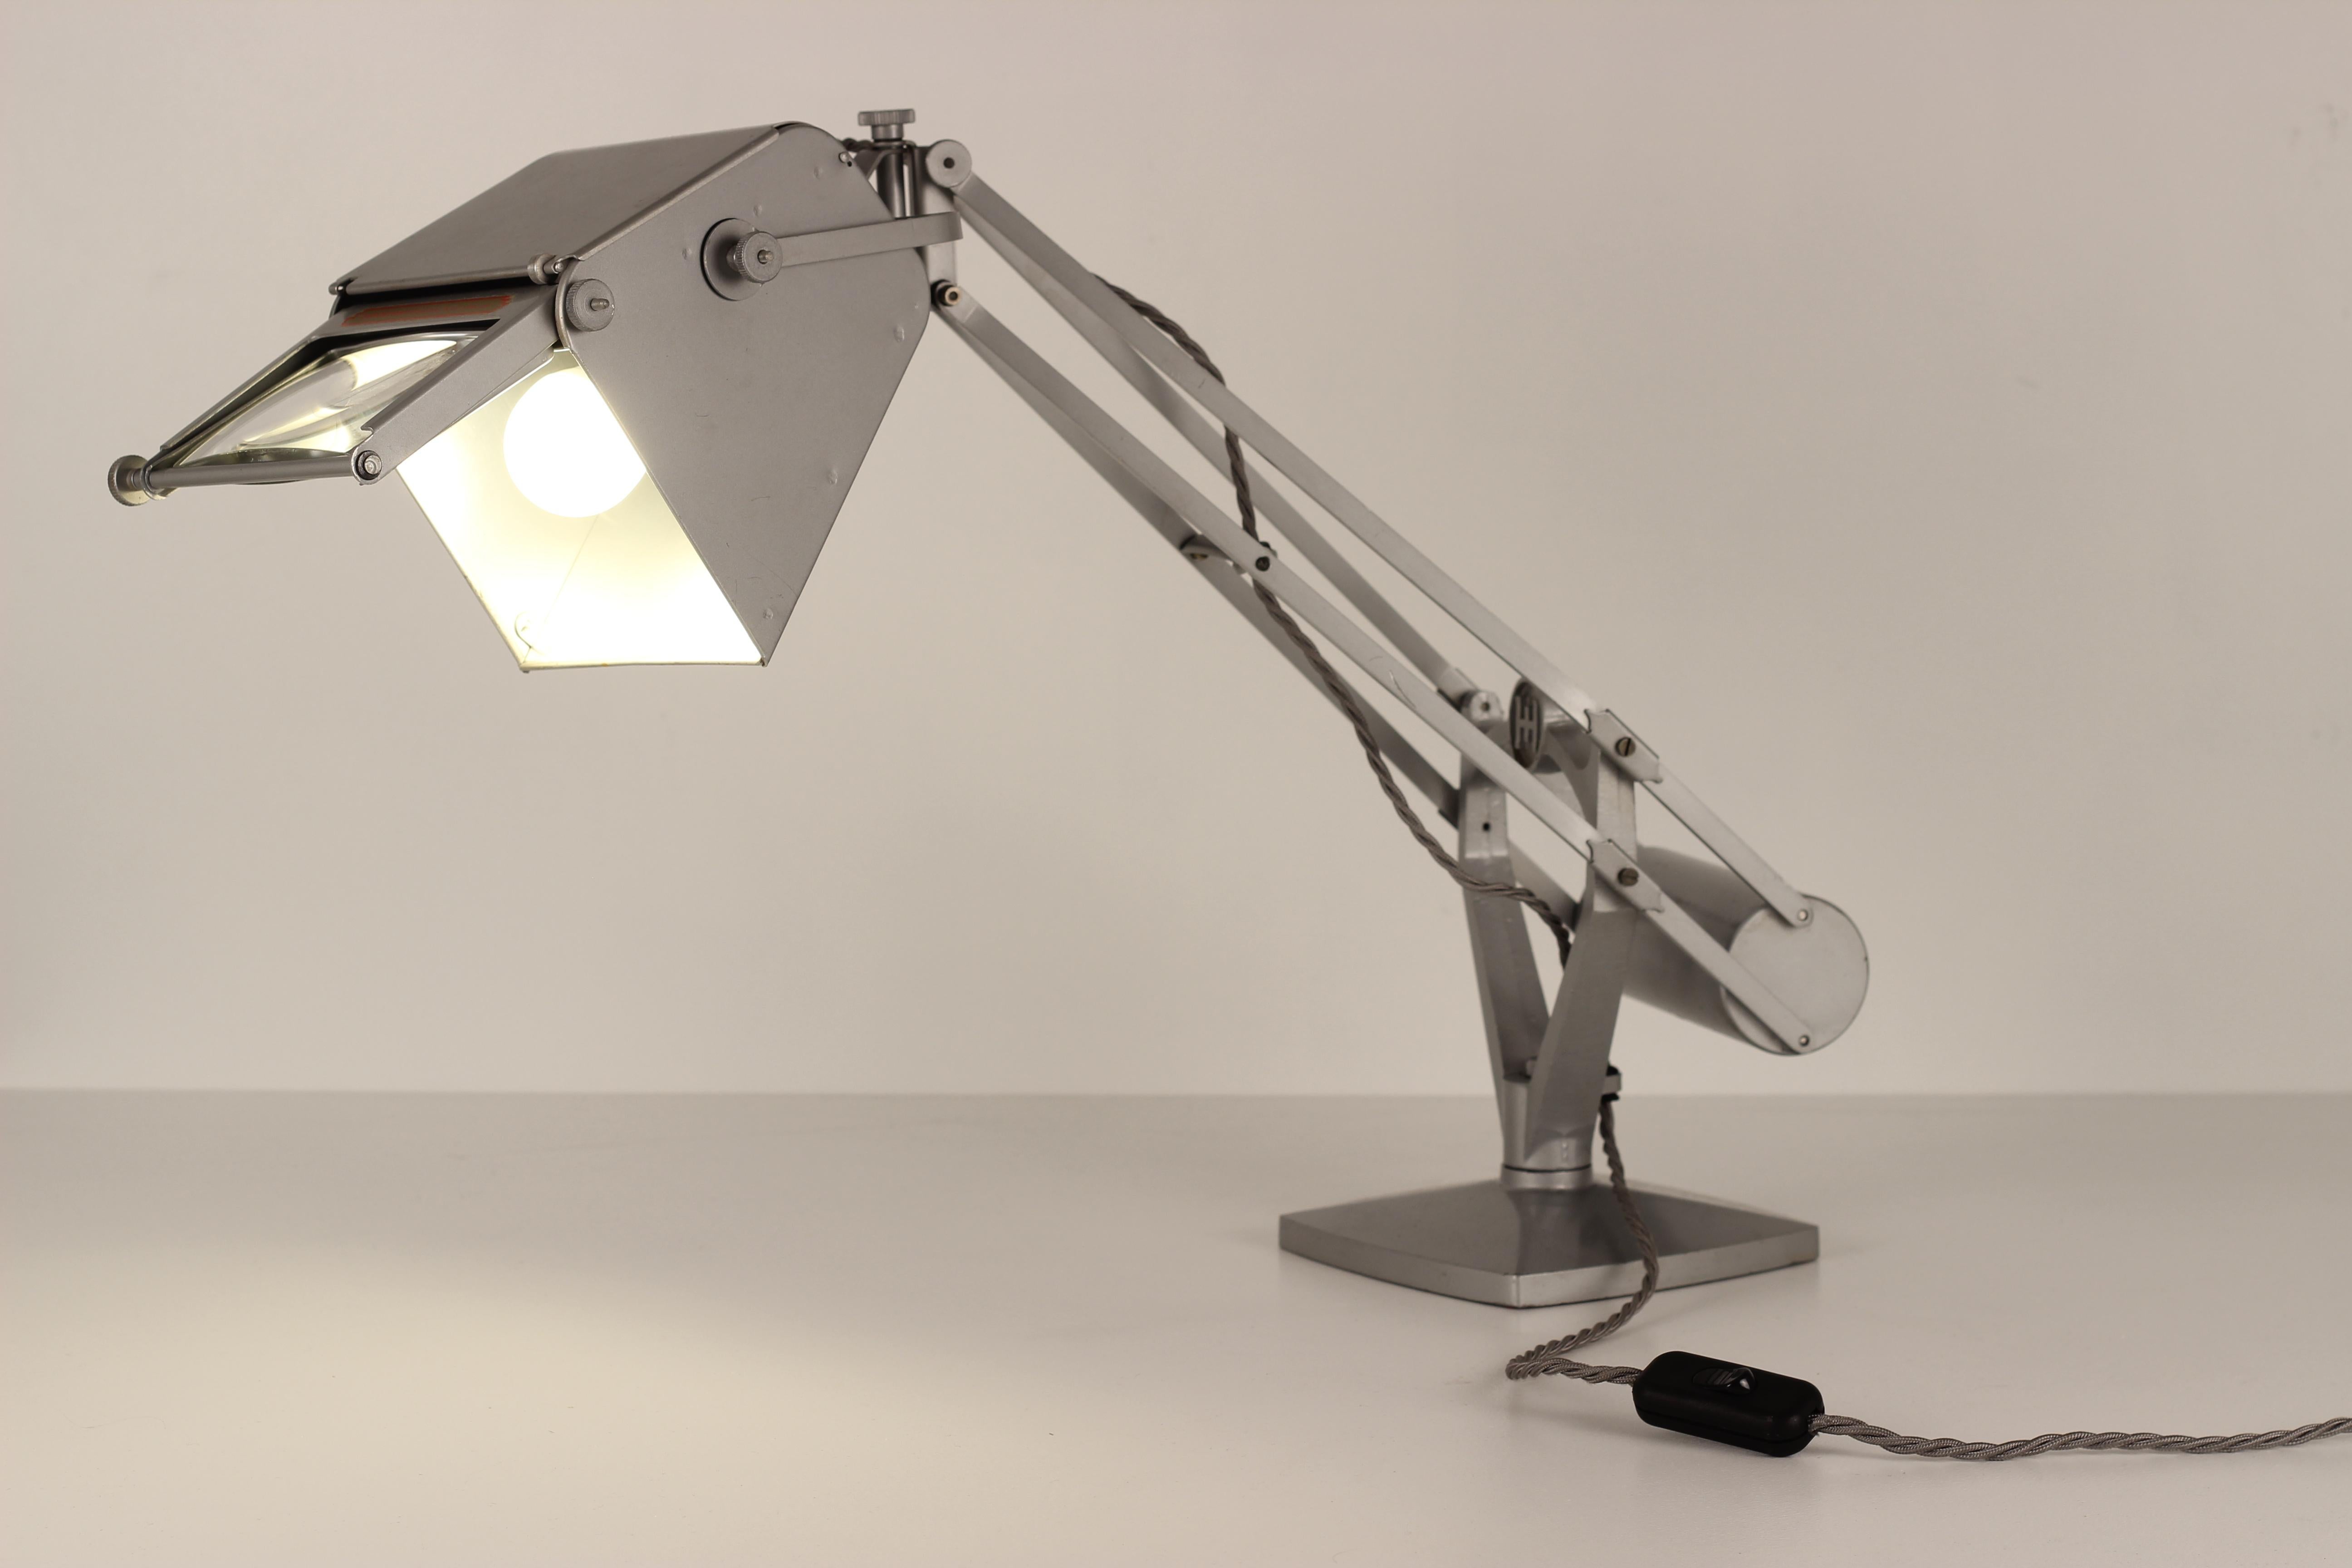 An original Horstmann magnifying anglepoise work lamp with weighted counterbalance. The Magnifying lens can retract to fit flush in the light head, which along with body will move in many different directions. This produces a work light that’s